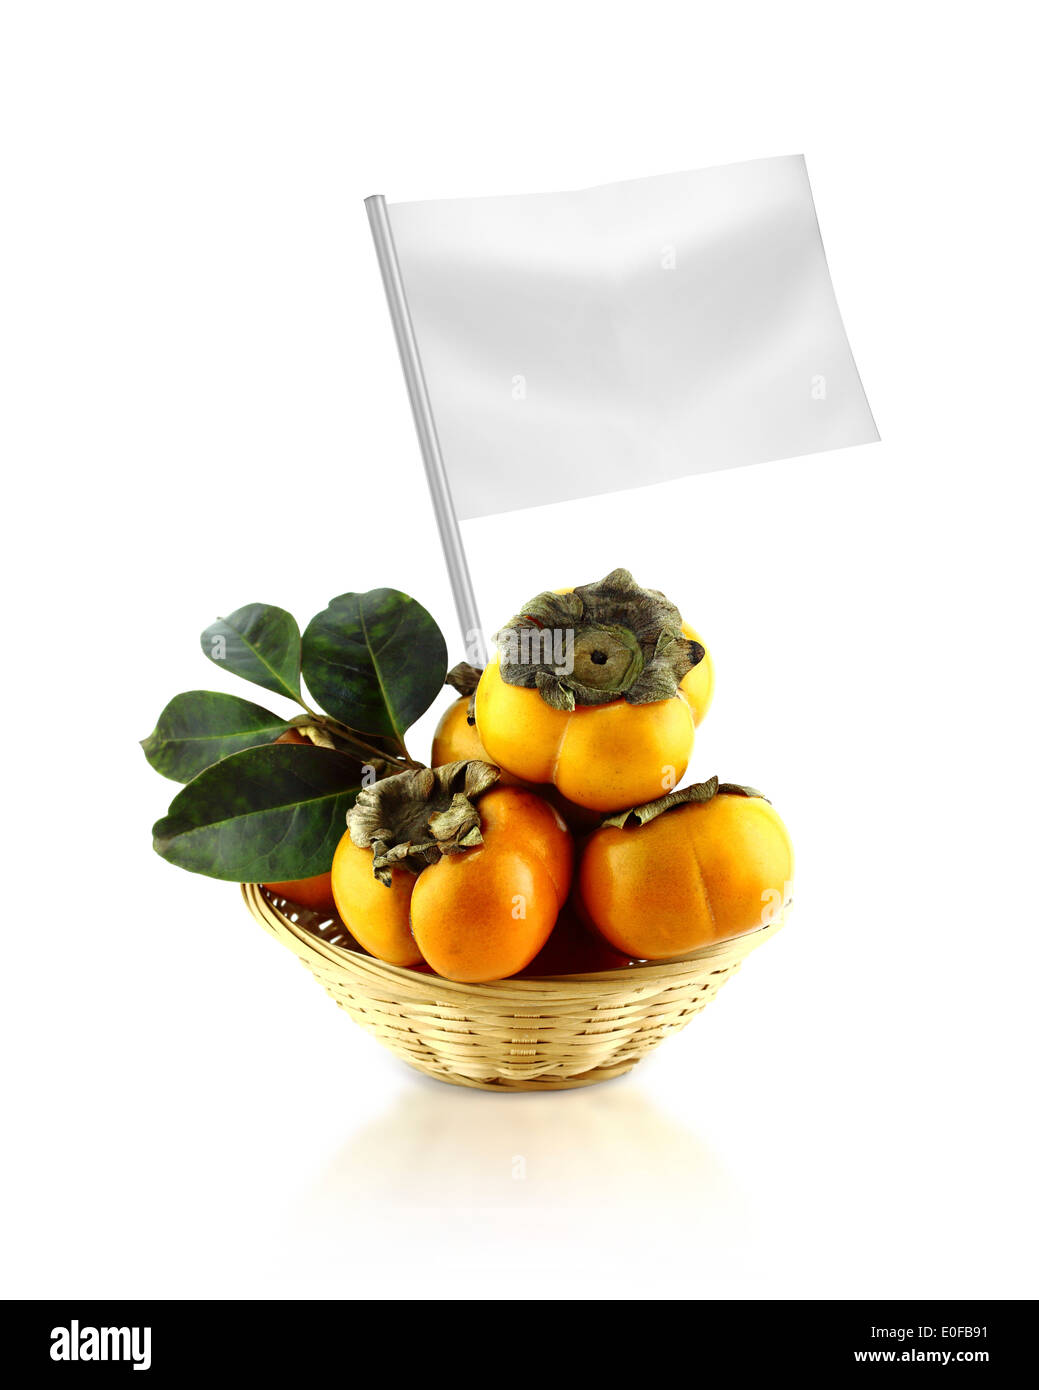 Healthy and organic food concept. Fresh persimmon with flag showing the benefits or the price of fruits. Stock Photo